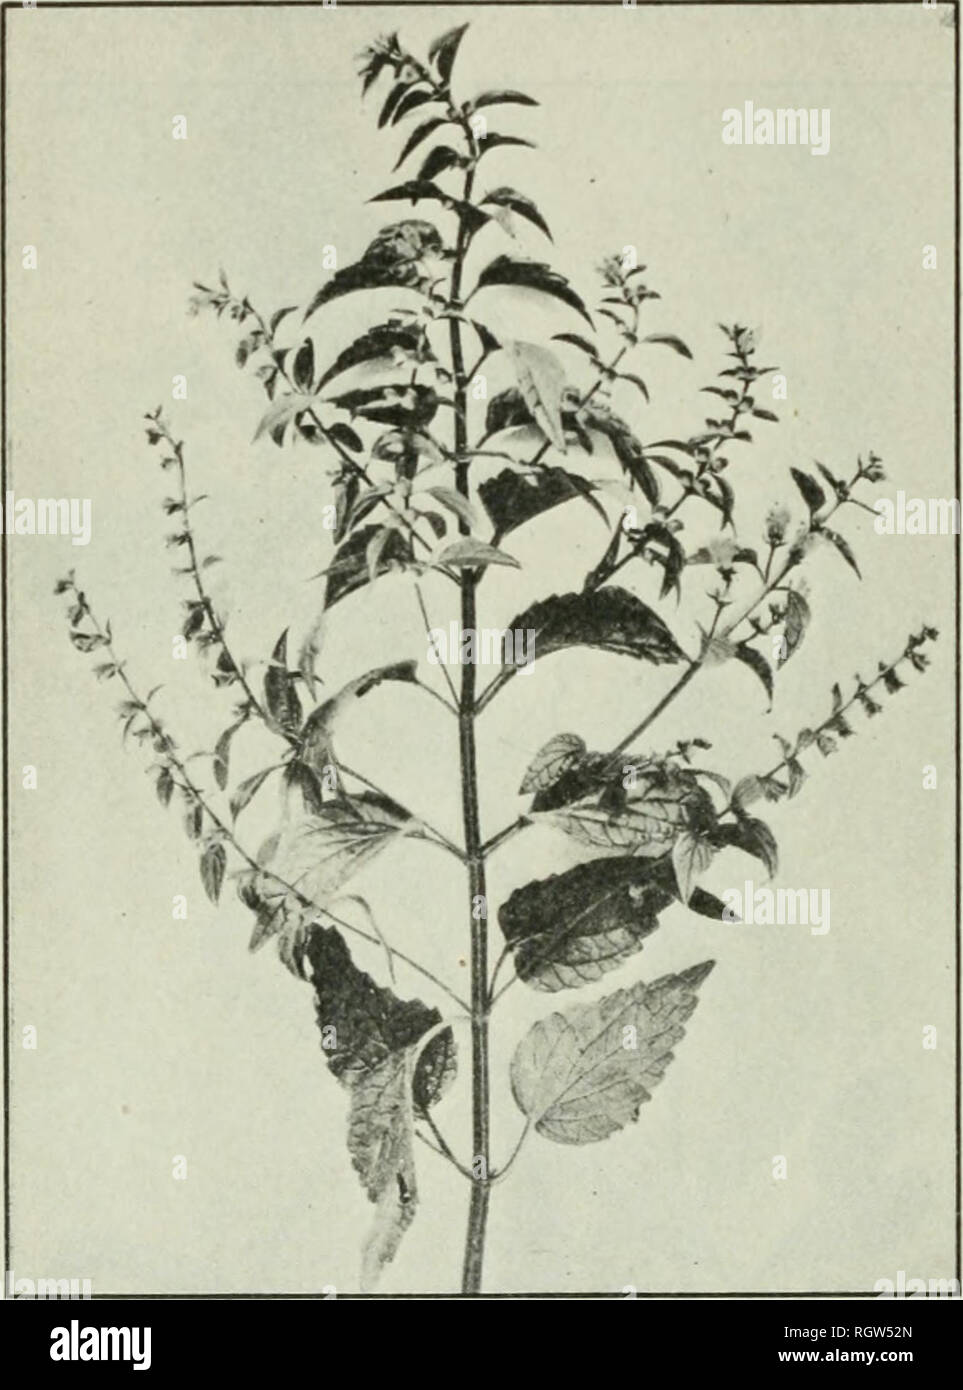 . Bulletin. 1901-13. Agriculture; Agriculture. 22 AMERICAN MKDICINAL LEAVES AND HERBS. SKULLCAP. Sriitellaria hiterijlora L. PJiannacopceial name.—Scutellaria. Other common iiamea.—American Bkullcaj), bhie pkiillcap, mad-dog skullcap, side- flowering skullcap, madweed, hoodwort, blue pimpernel, hooded willow-herb. Ildhiint andninge.—Thi.'^ species i.-i native in damp ])laces along banks of wtreams from Canada southward to Florida, New Mexico, and Washington. Description.—The 1 i p - shaped flowers and squar- i.'ih stems of the skullcap indicate that it is a member of the mint family (Men- thac Stock Photo